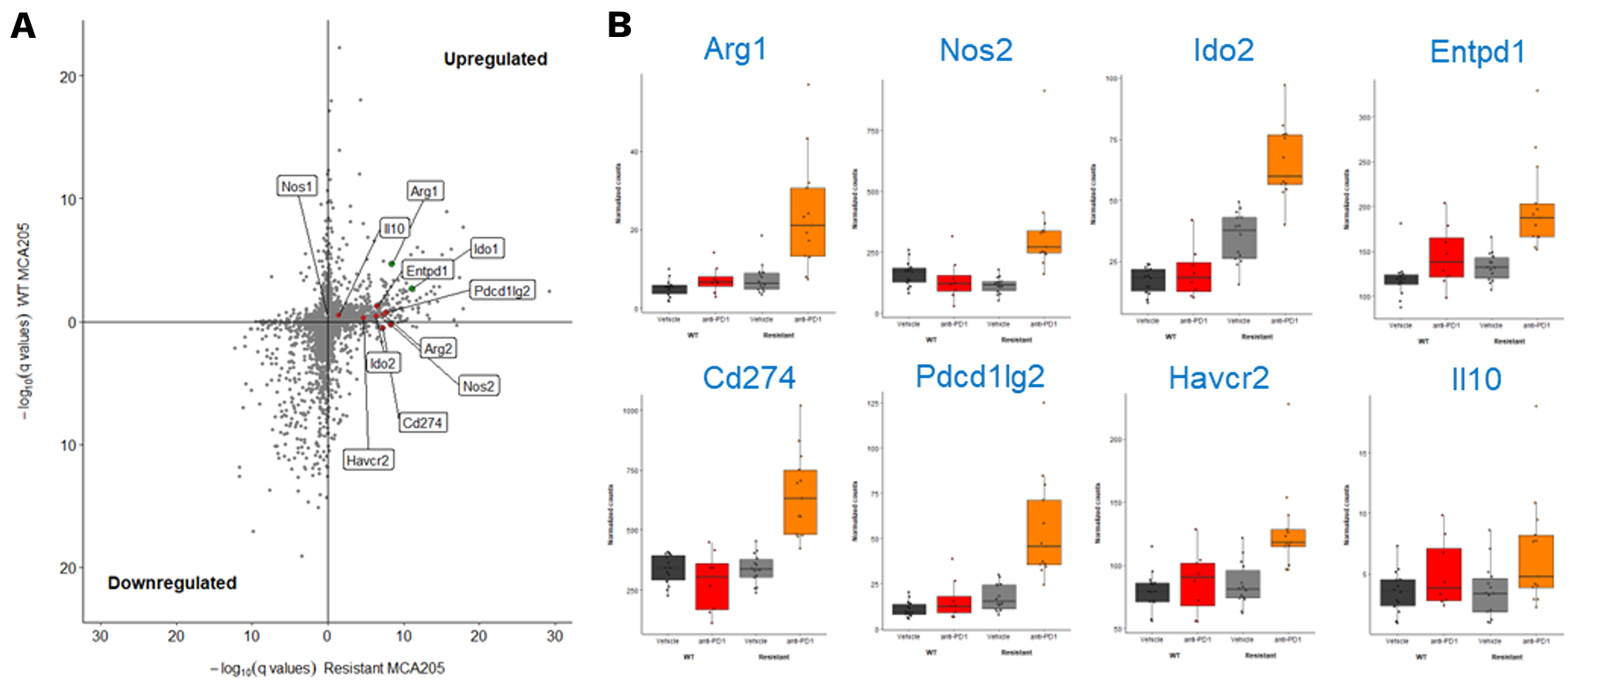 RNA sequencing of MCA205-S and PD1/PDL1 MCA205-R tumor biopsies collected under vehicle and PD1 blockade highlights key genes significantly upregulated upon PD1 inhibition in MCA205-R tumors